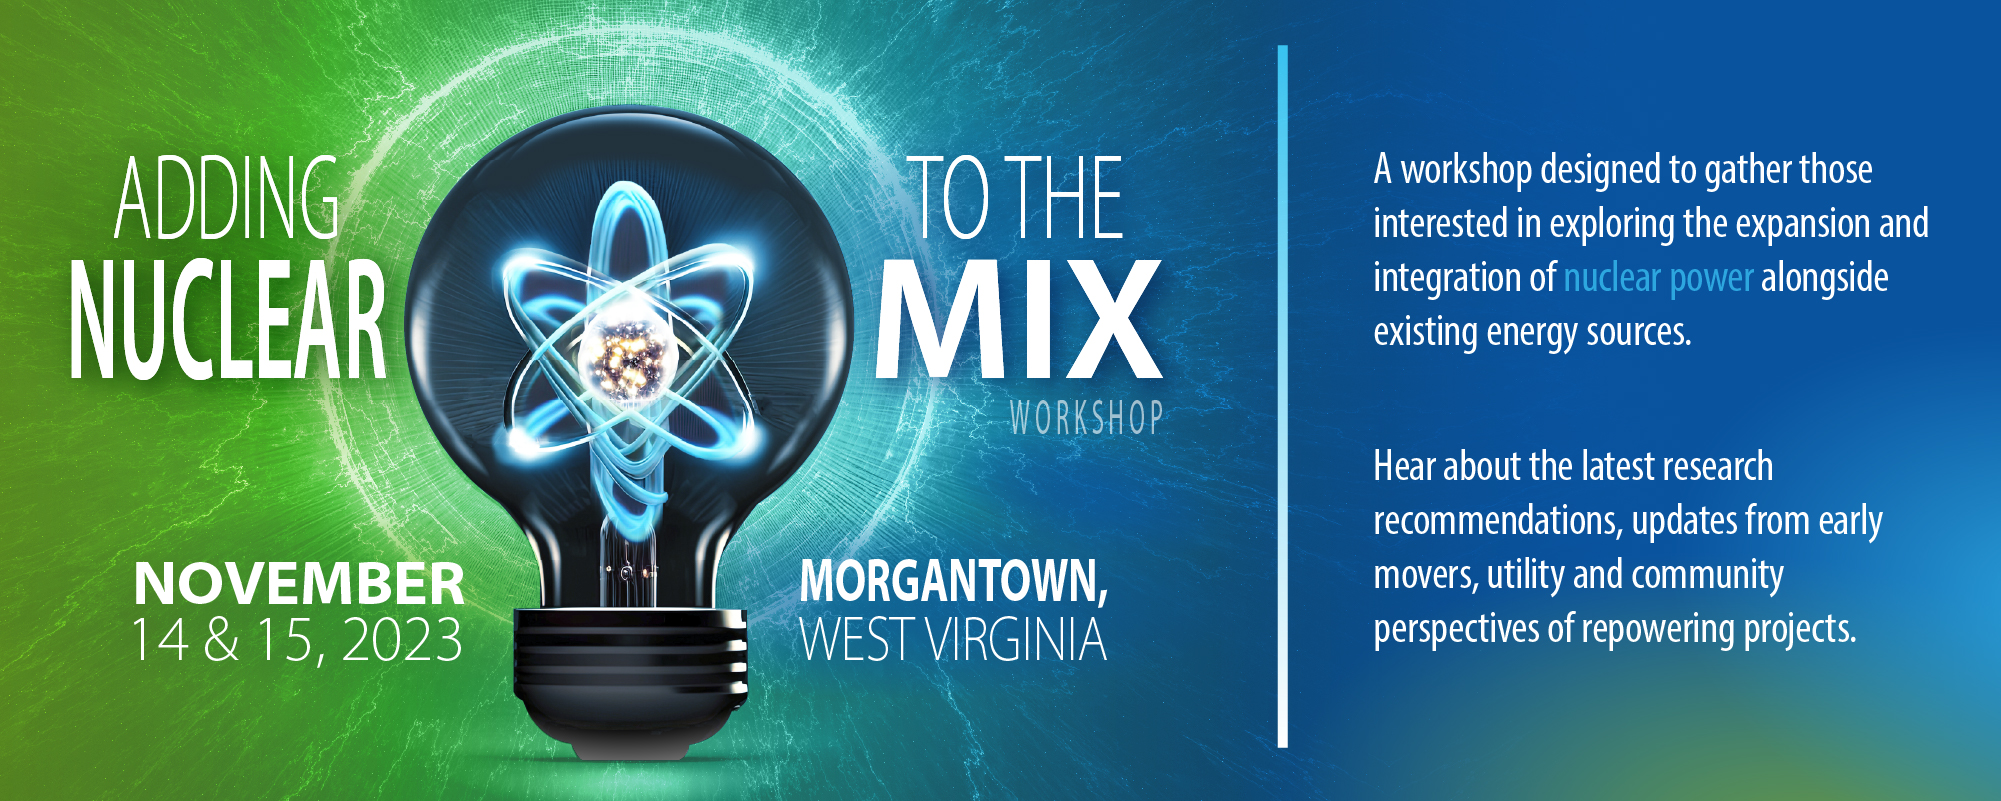 Adding Nuclear to the Mix Workshop Banner.